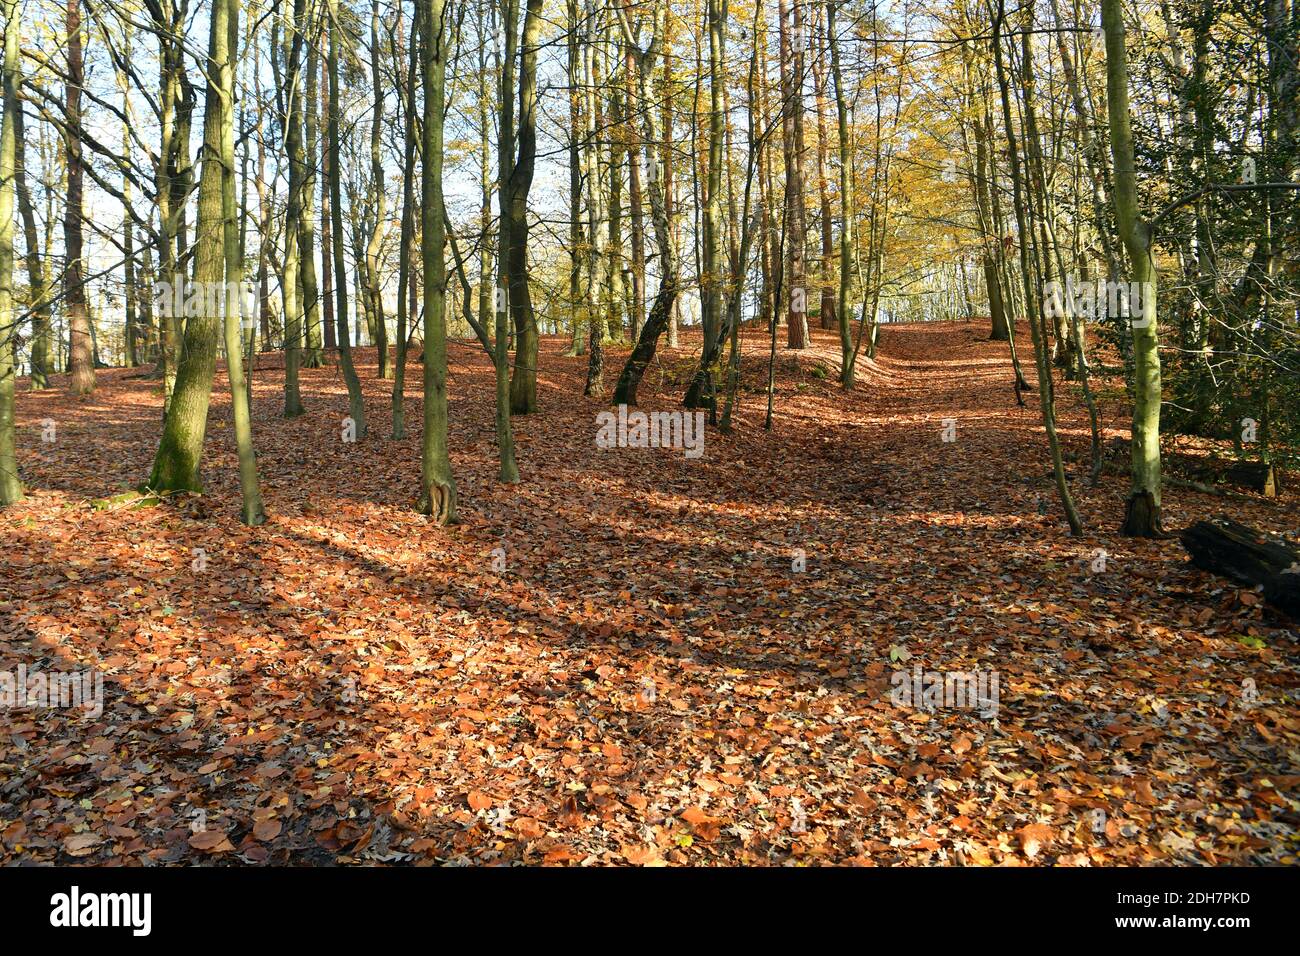 Photos for a feature on Wellesley Woodland, Aldershot - Autumn weekend walks feature. Woodland trails. Stock Photo